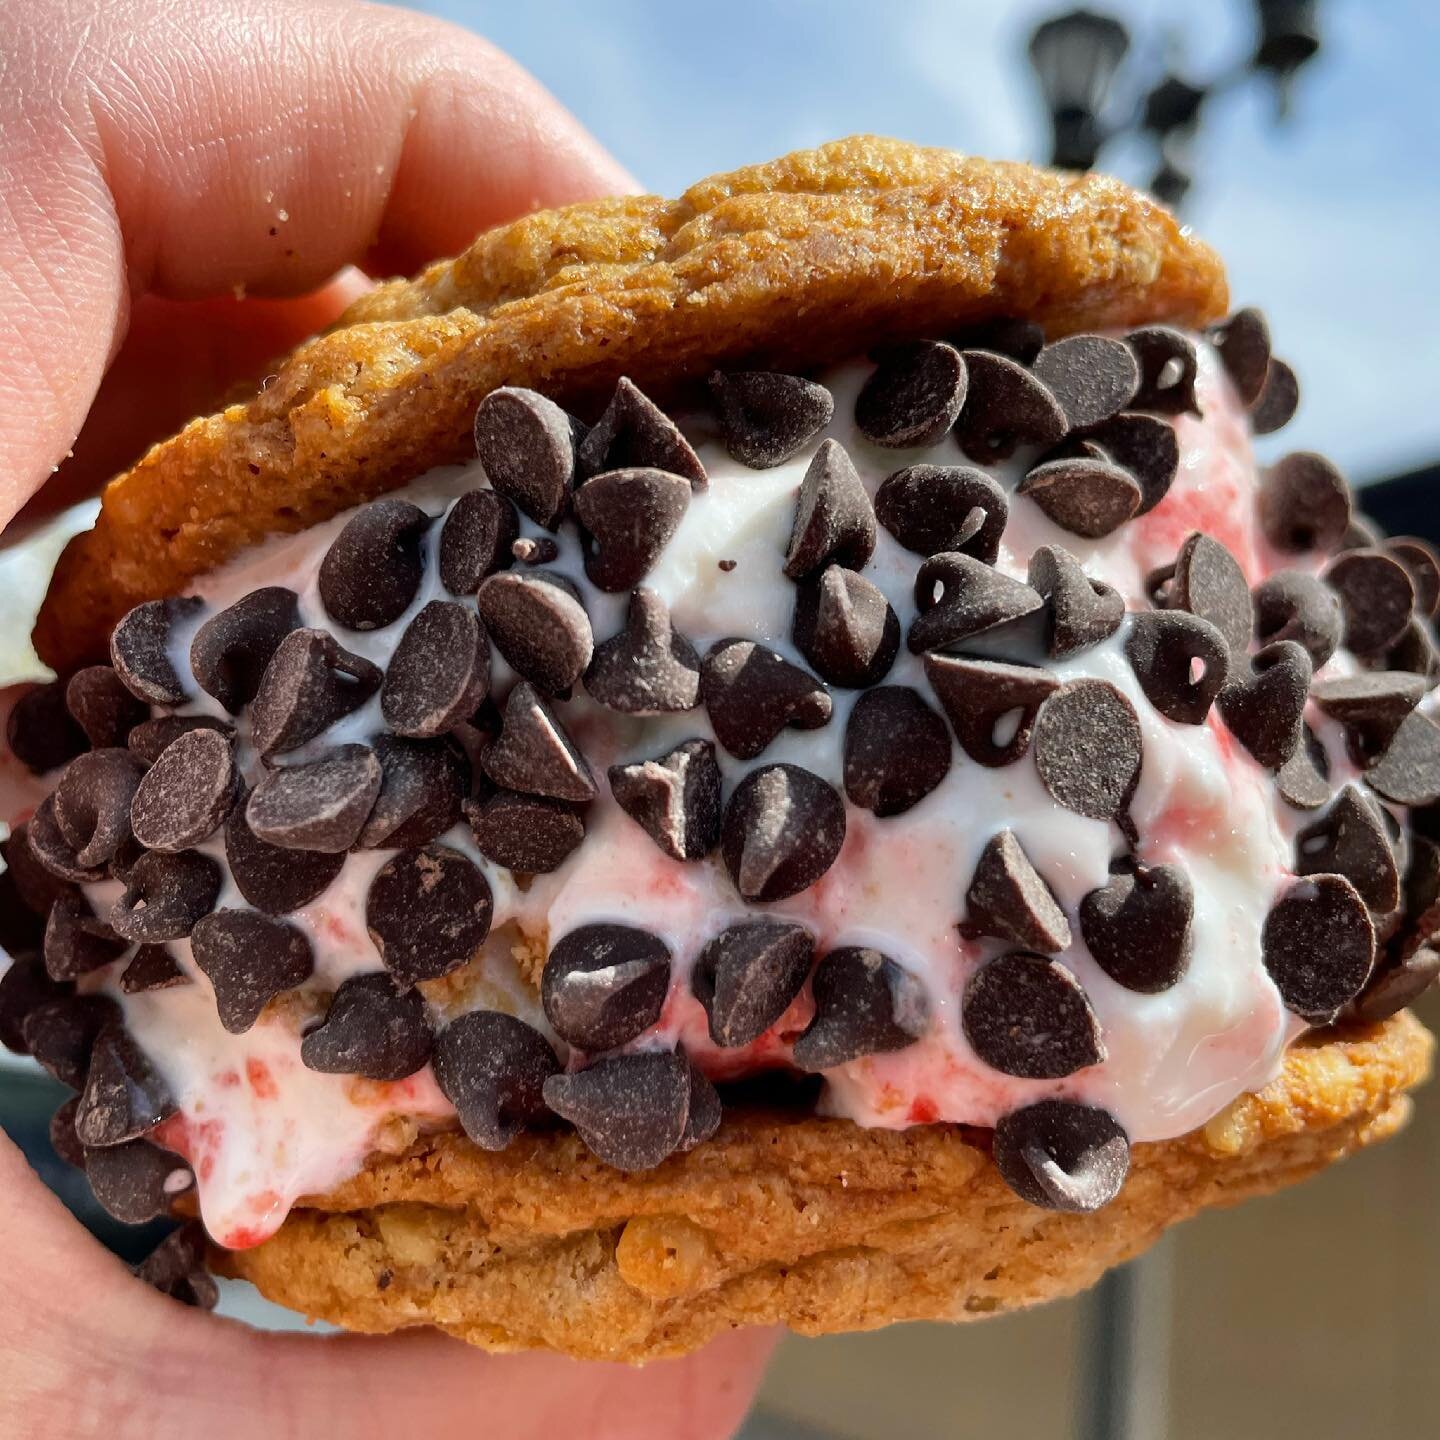 Walnut oatmeal golden raisin cookies with strawberry cheesecake ice cream, mini chocolate chip roll-in, and of course you gotta hot press it! 🍪🍓🍫🍪 #nelliesicecream #icecreamcookiesandwich